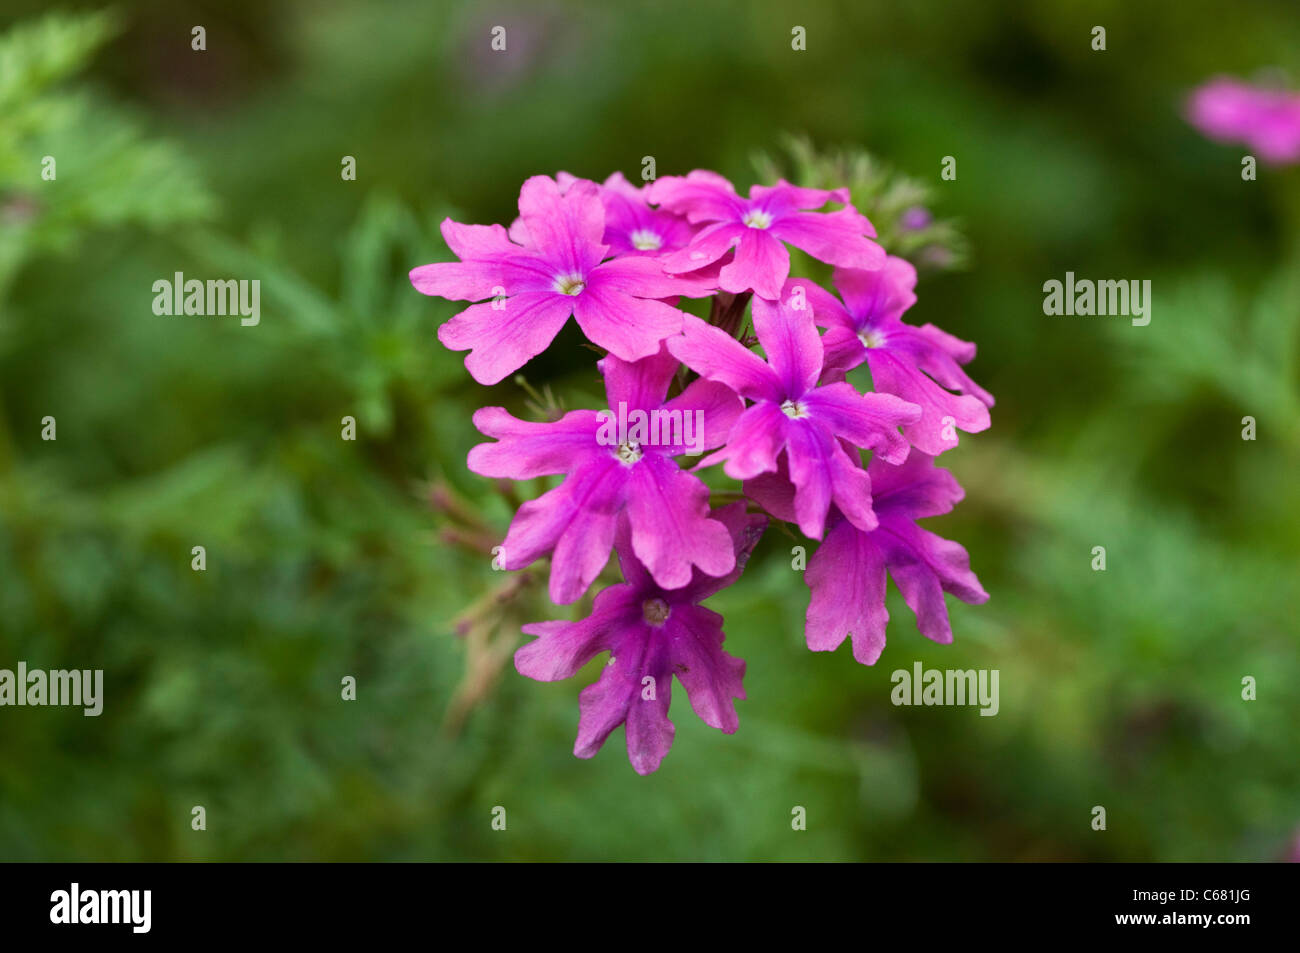 Brighly bloomes Verbena flower isolated on green Stock Photo